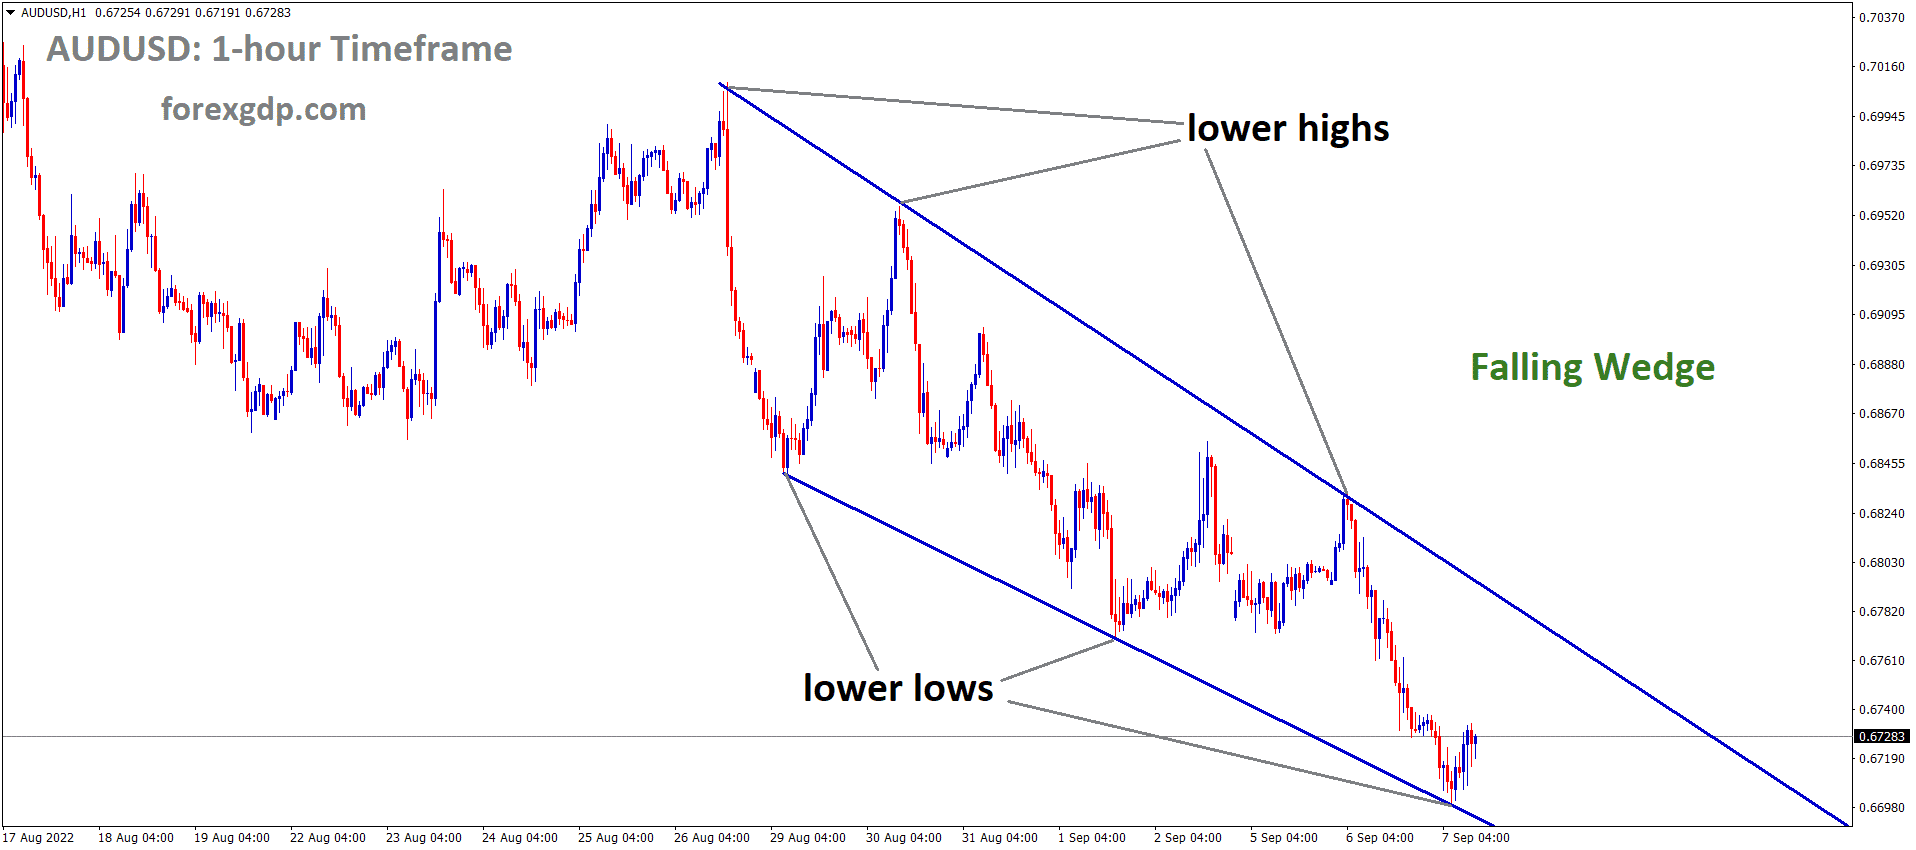 AUDUSD is moving in the Falling wedge pattern and the market has rebounded from the lower low area of the pattern